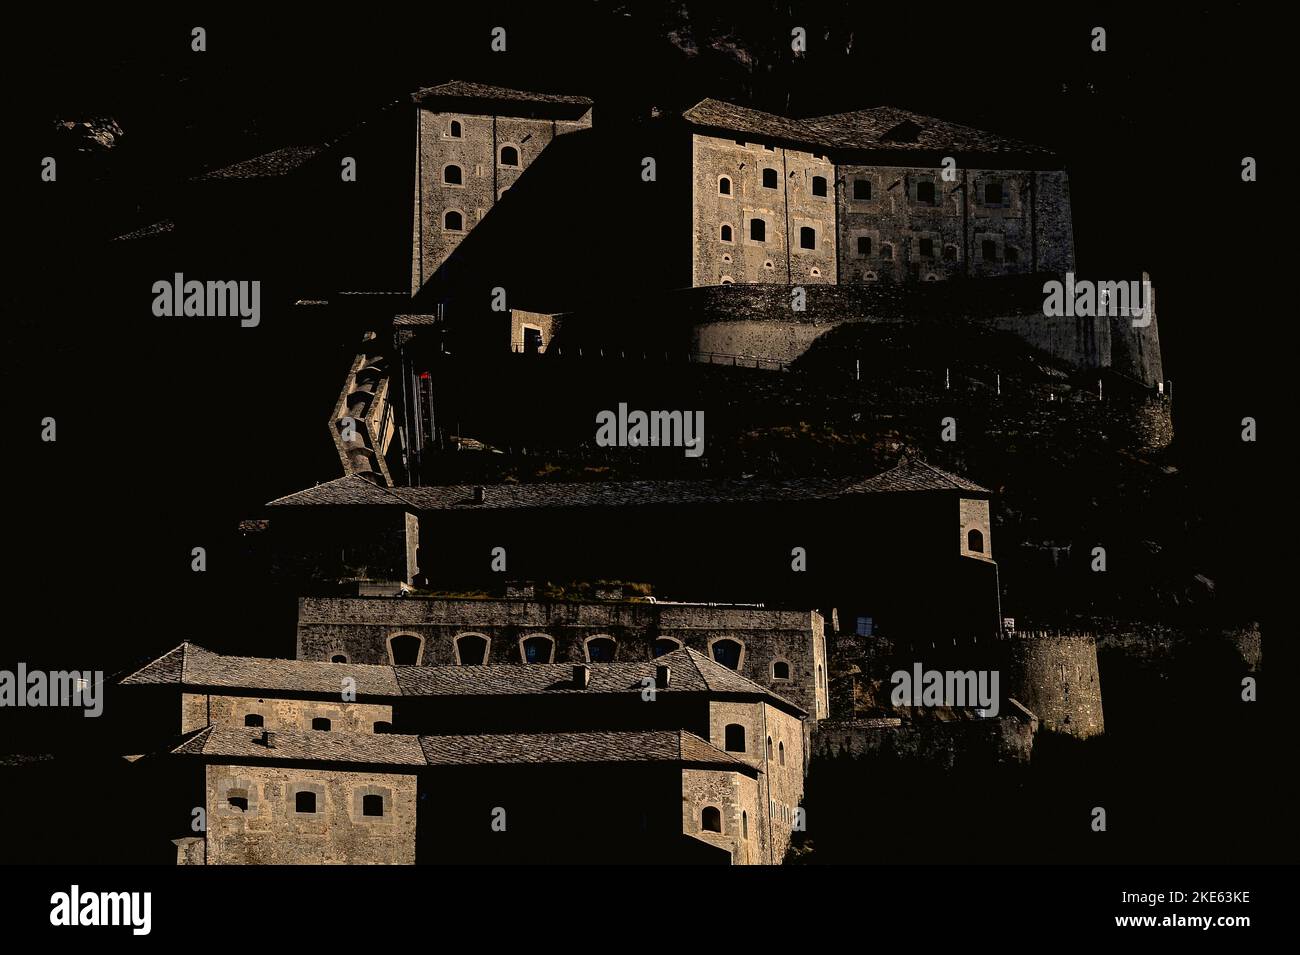 Amid deep shadows, sunlight washes over the walls and gun ports of Fort Bard, an early-19th century Italian bulwark against French invasions built in the steep-sided Aosta Valley gorge at Bard to control the narrow alpine gateway to northwest Italy. Stock Photo